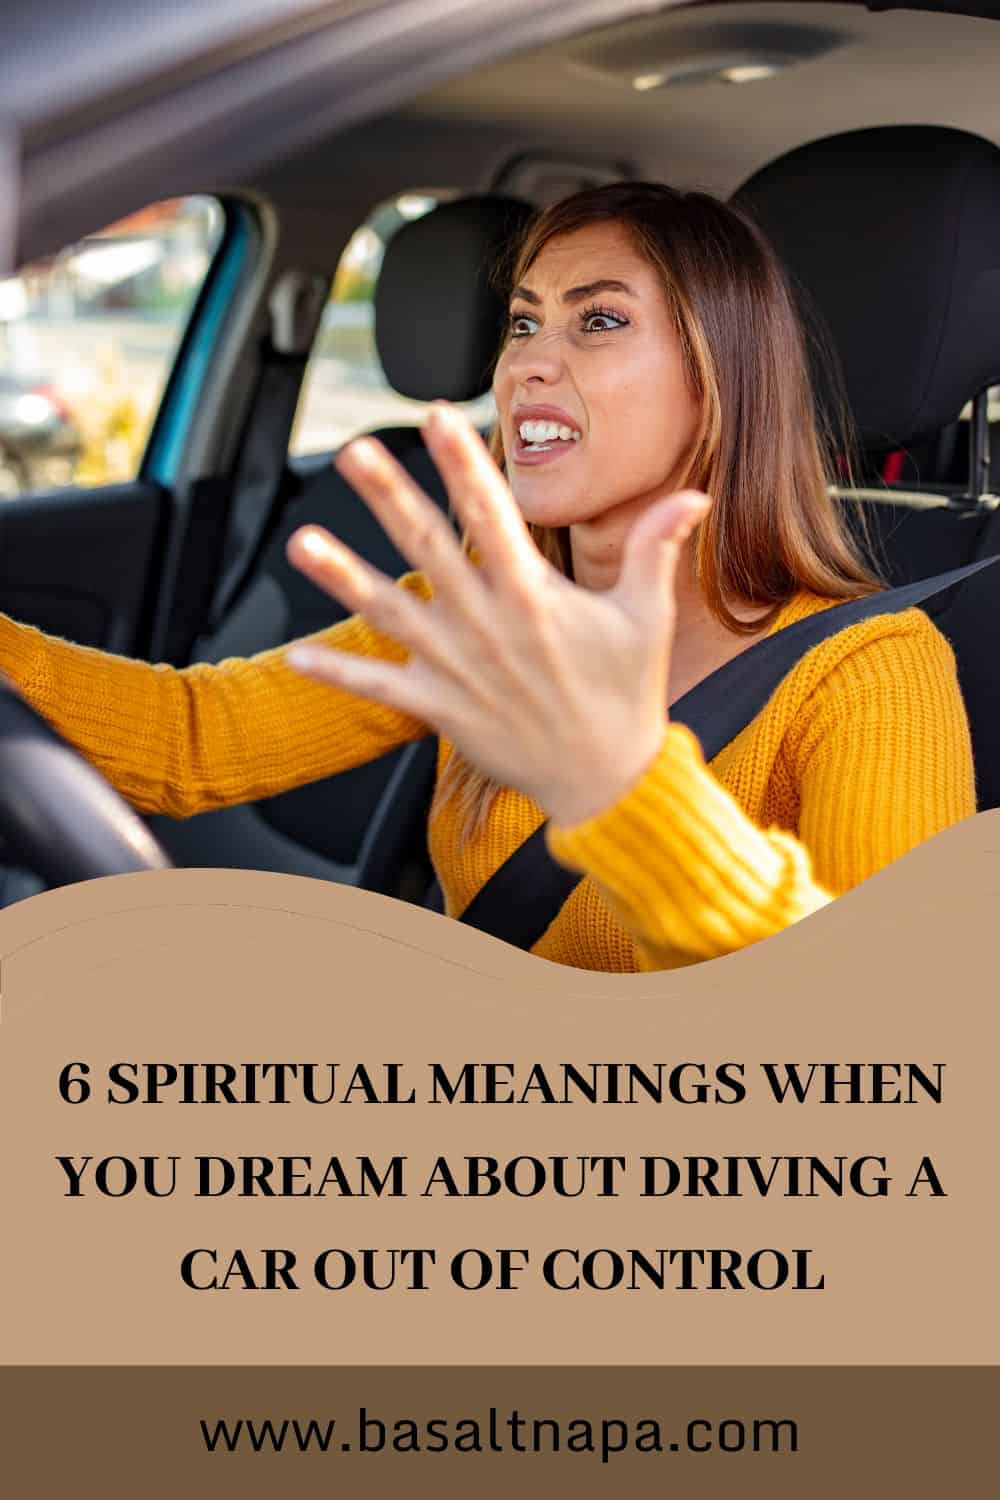 6 Spiritual Meanings When You Dream About Driving A Car Out of Control